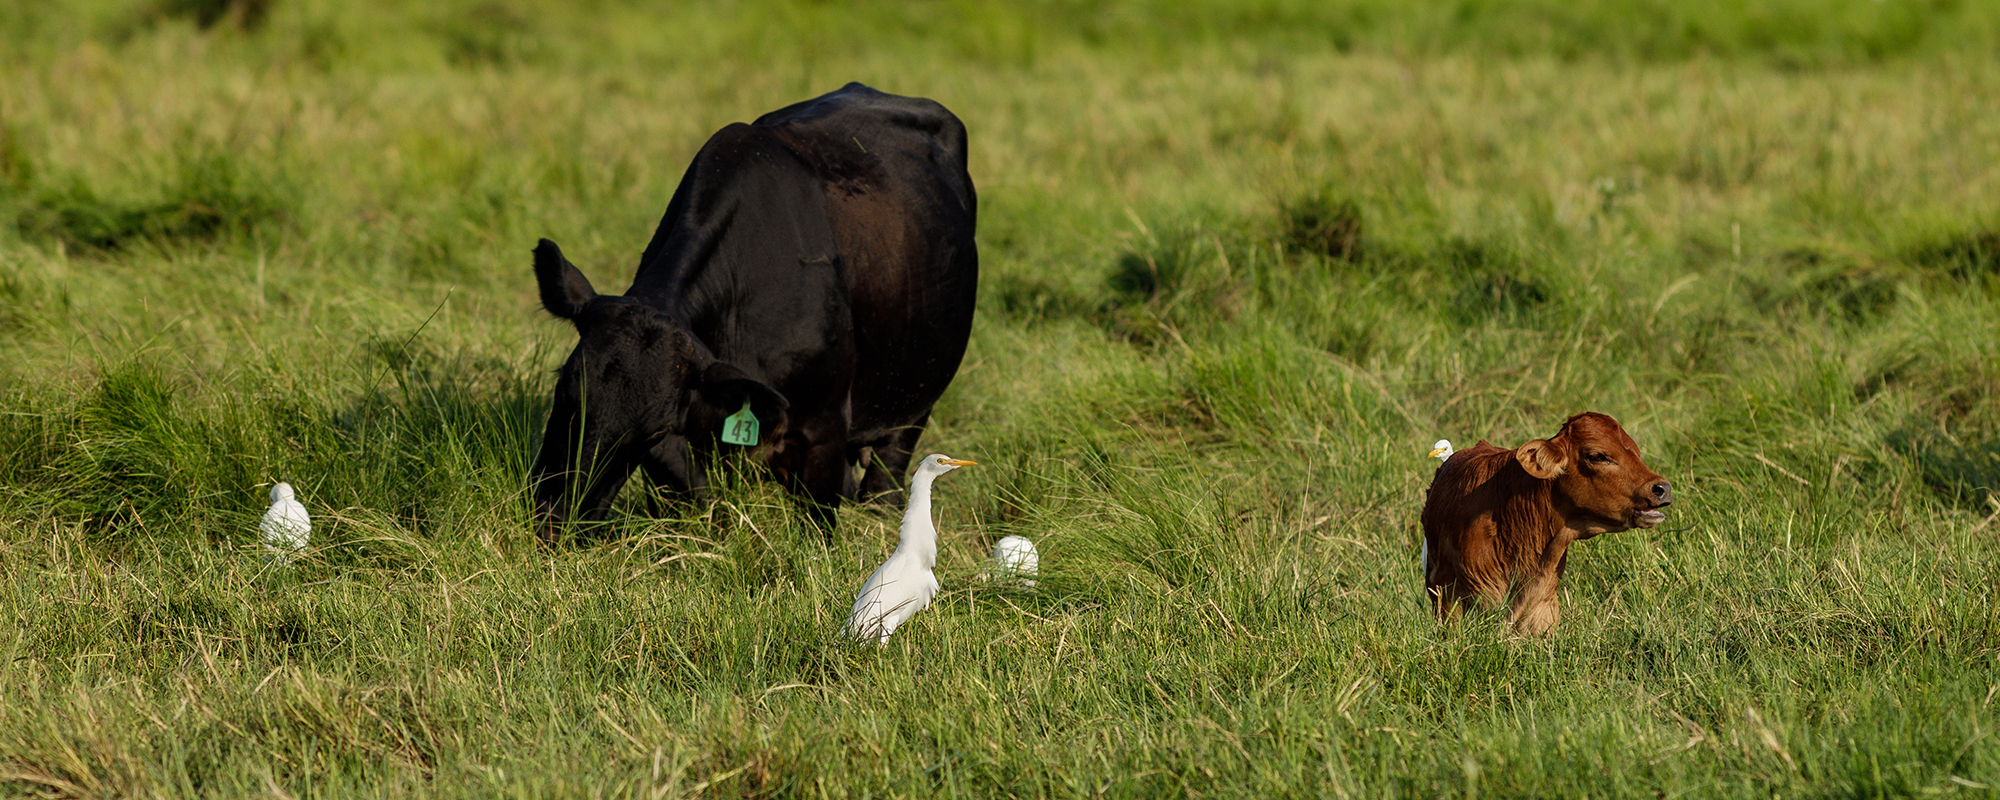 Match forage flow with livestock nutritional needs to increase ranch profitability